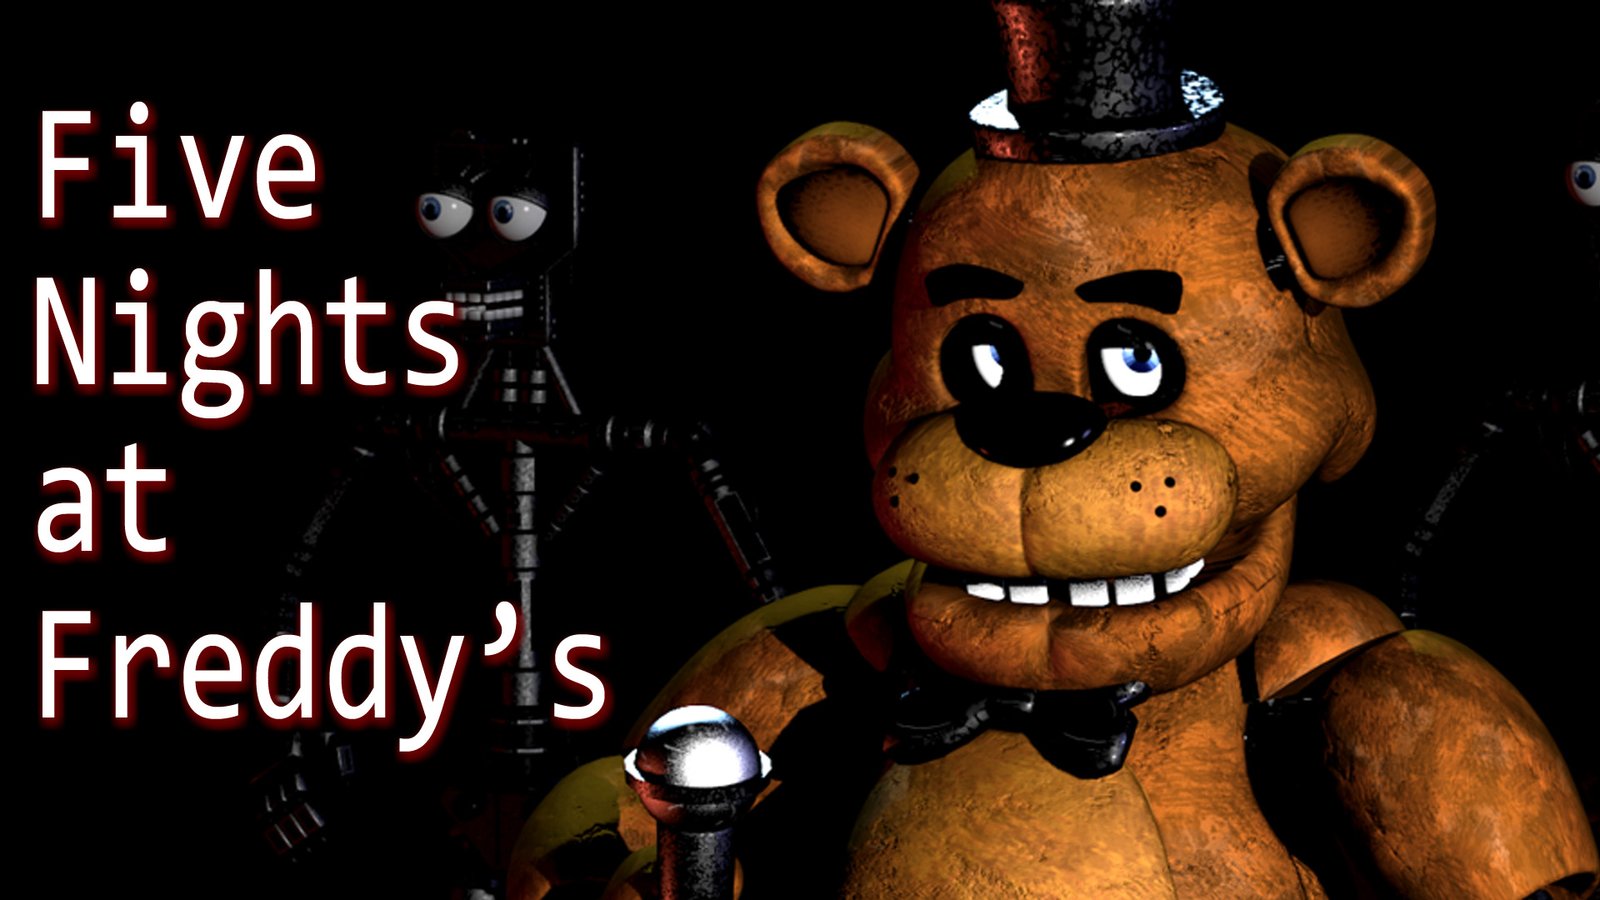 Five Nights at Freddy’s crazy game marketing – the rise of a multi-million dollar scary franchise - Kickstart Side Hustle